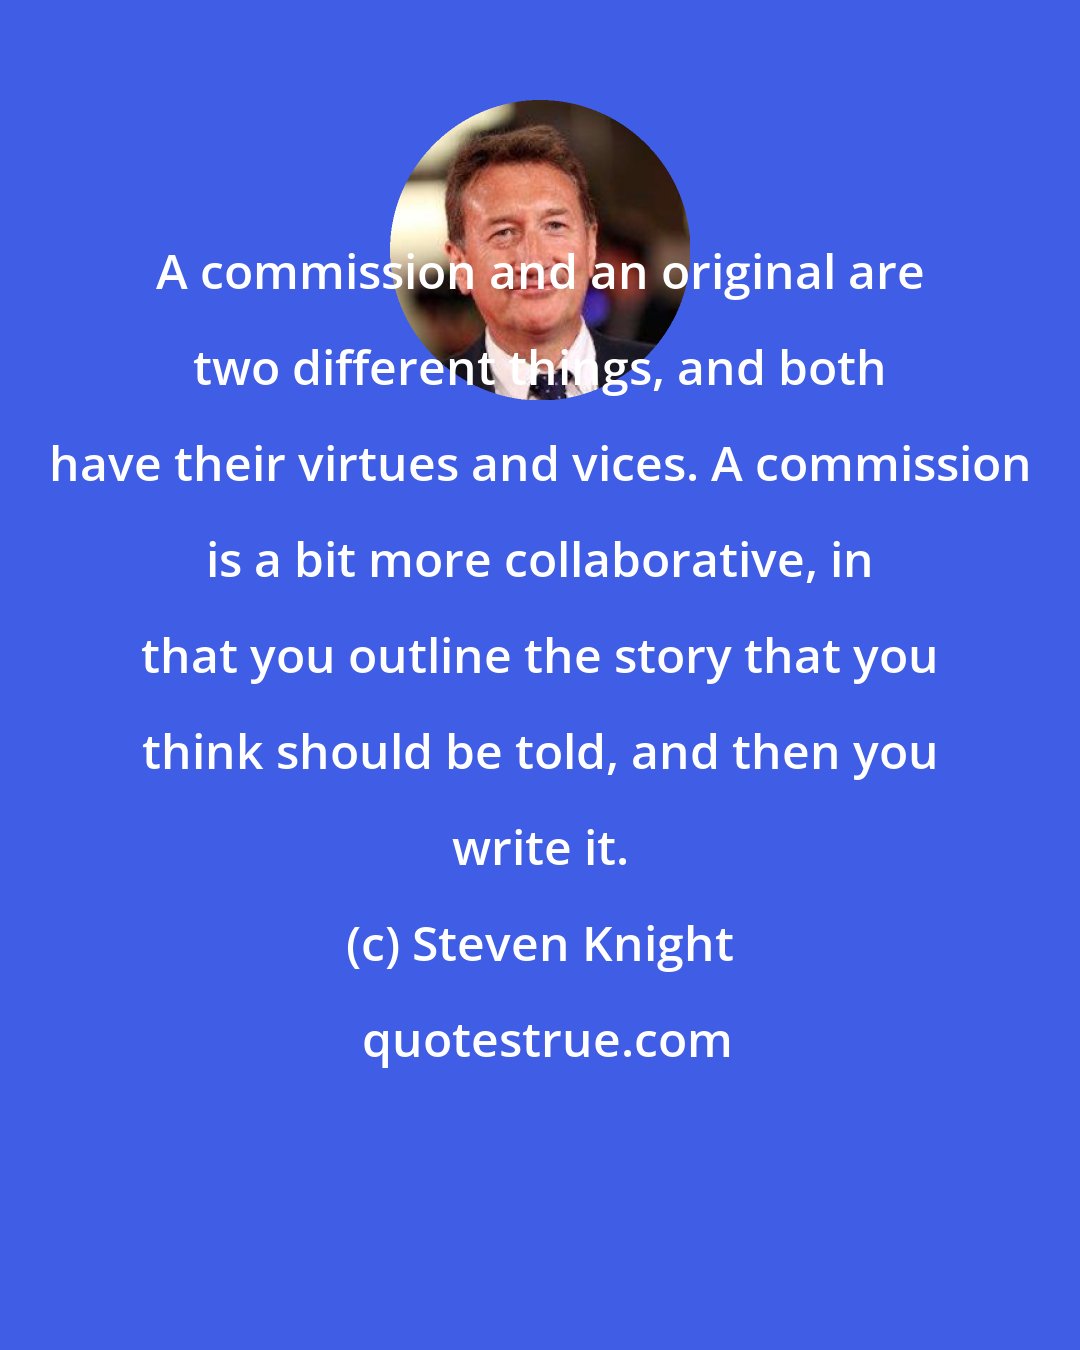 Steven Knight: A commission and an original are two different things, and both have their virtues and vices. A commission is a bit more collaborative, in that you outline the story that you think should be told, and then you write it.